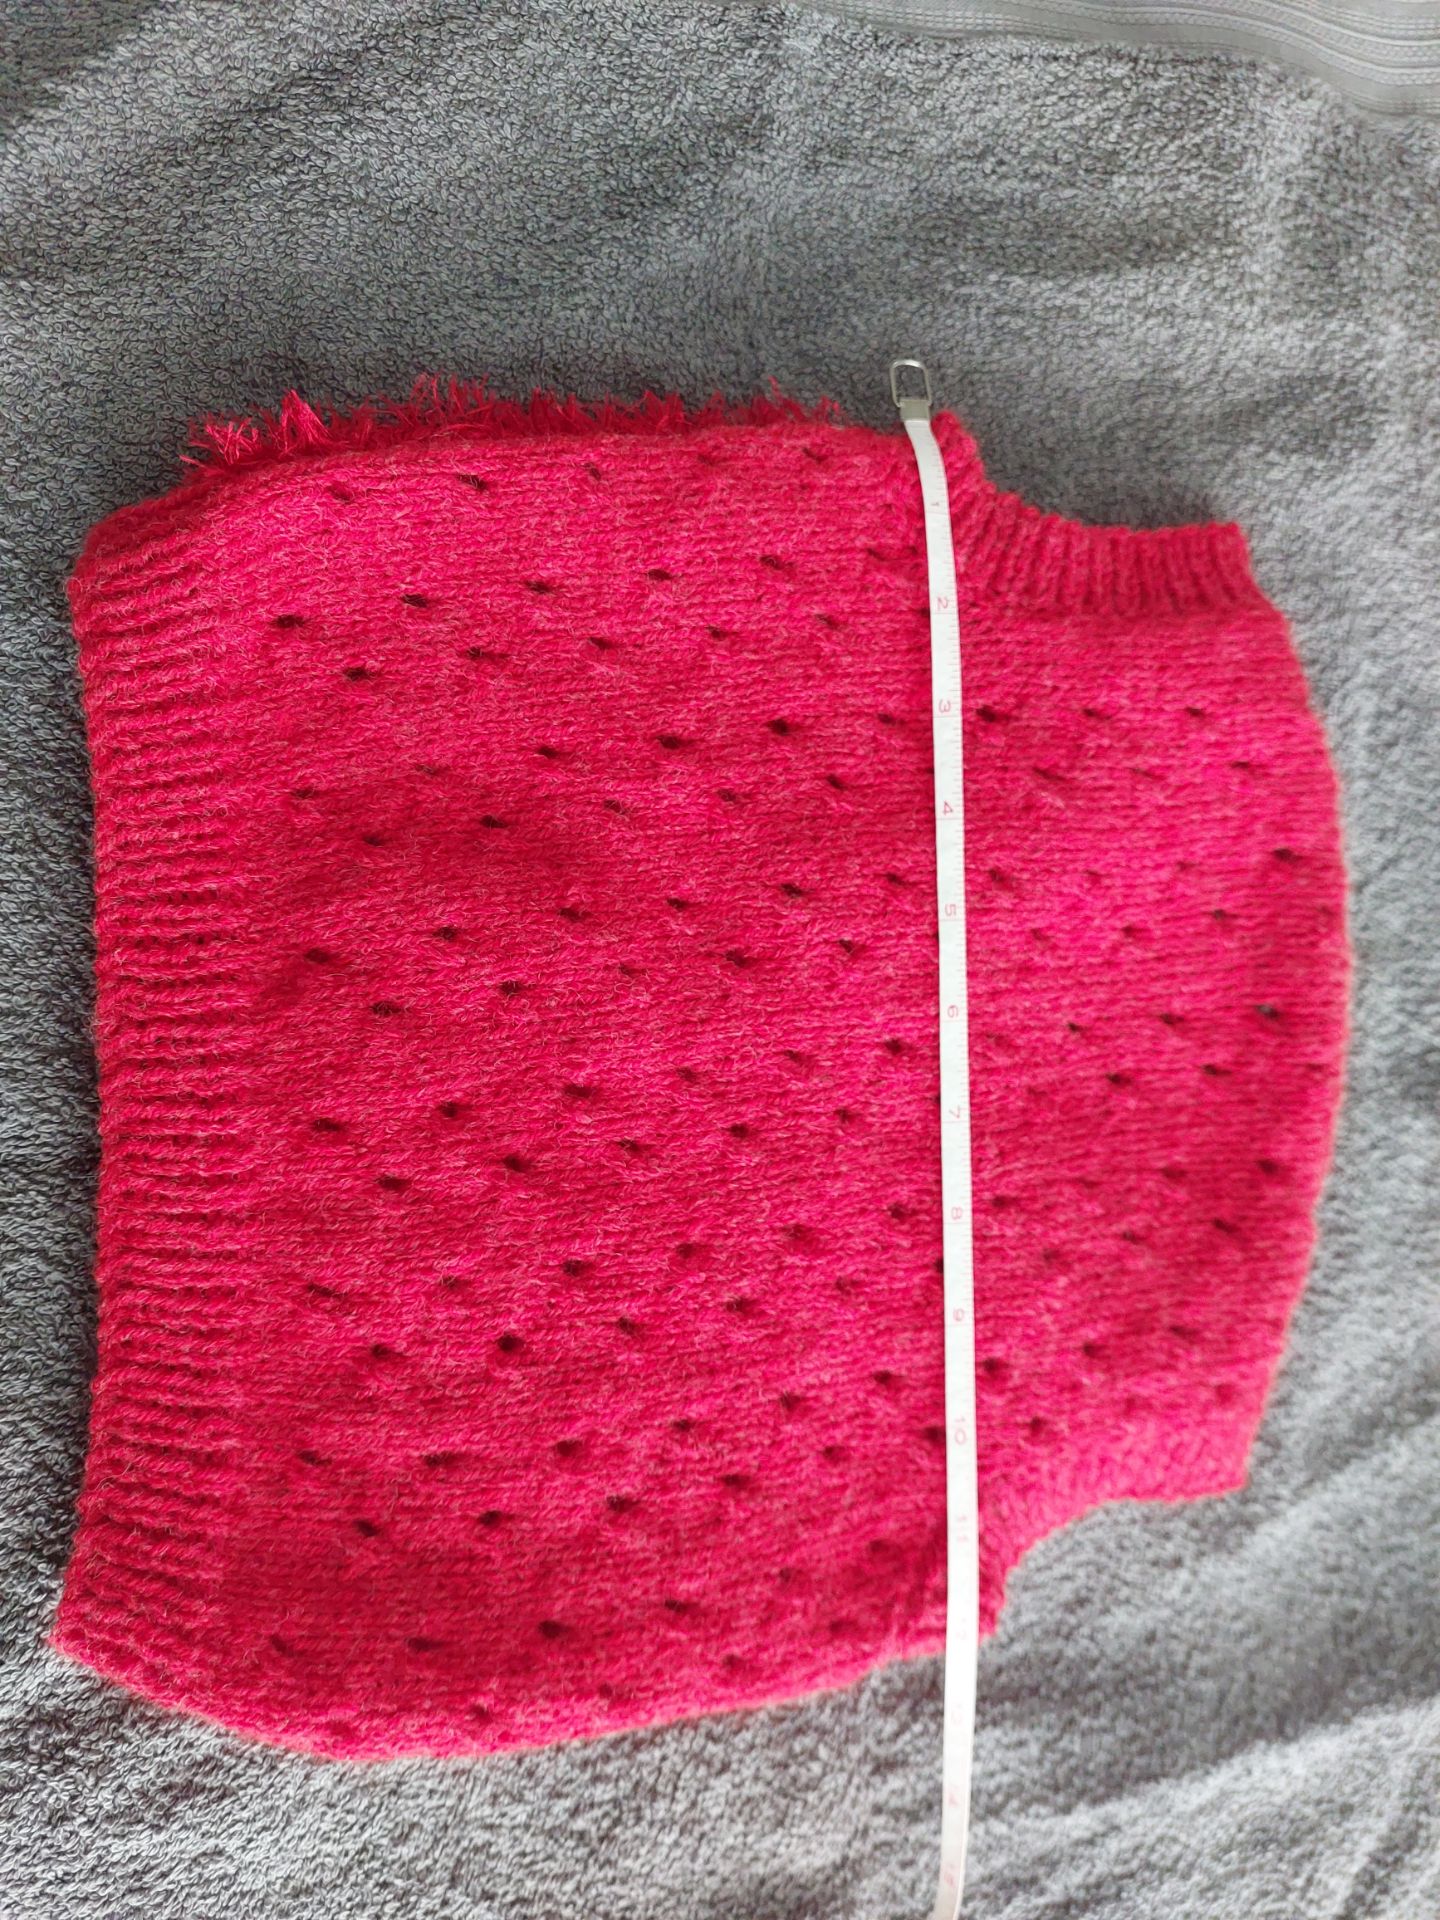 Hand Knitted Gilet - Image 2 of 5